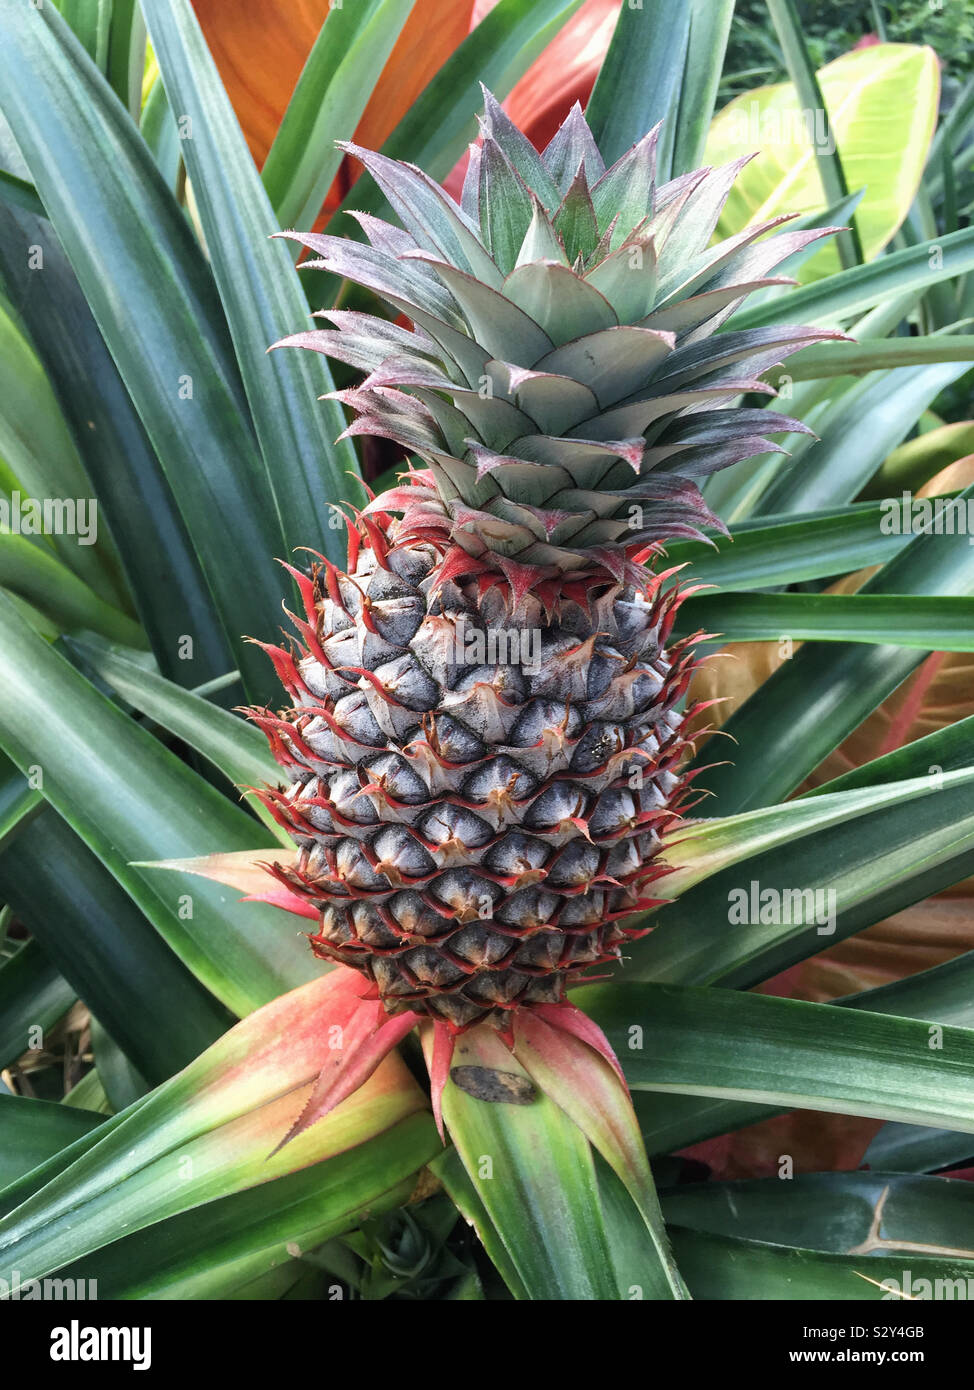 A small pineapple is growing inside a leafy plant. Pineapples grow from the ground up and within the plant. The sword like leaves can get up to 5 feet tall. Stock Photo